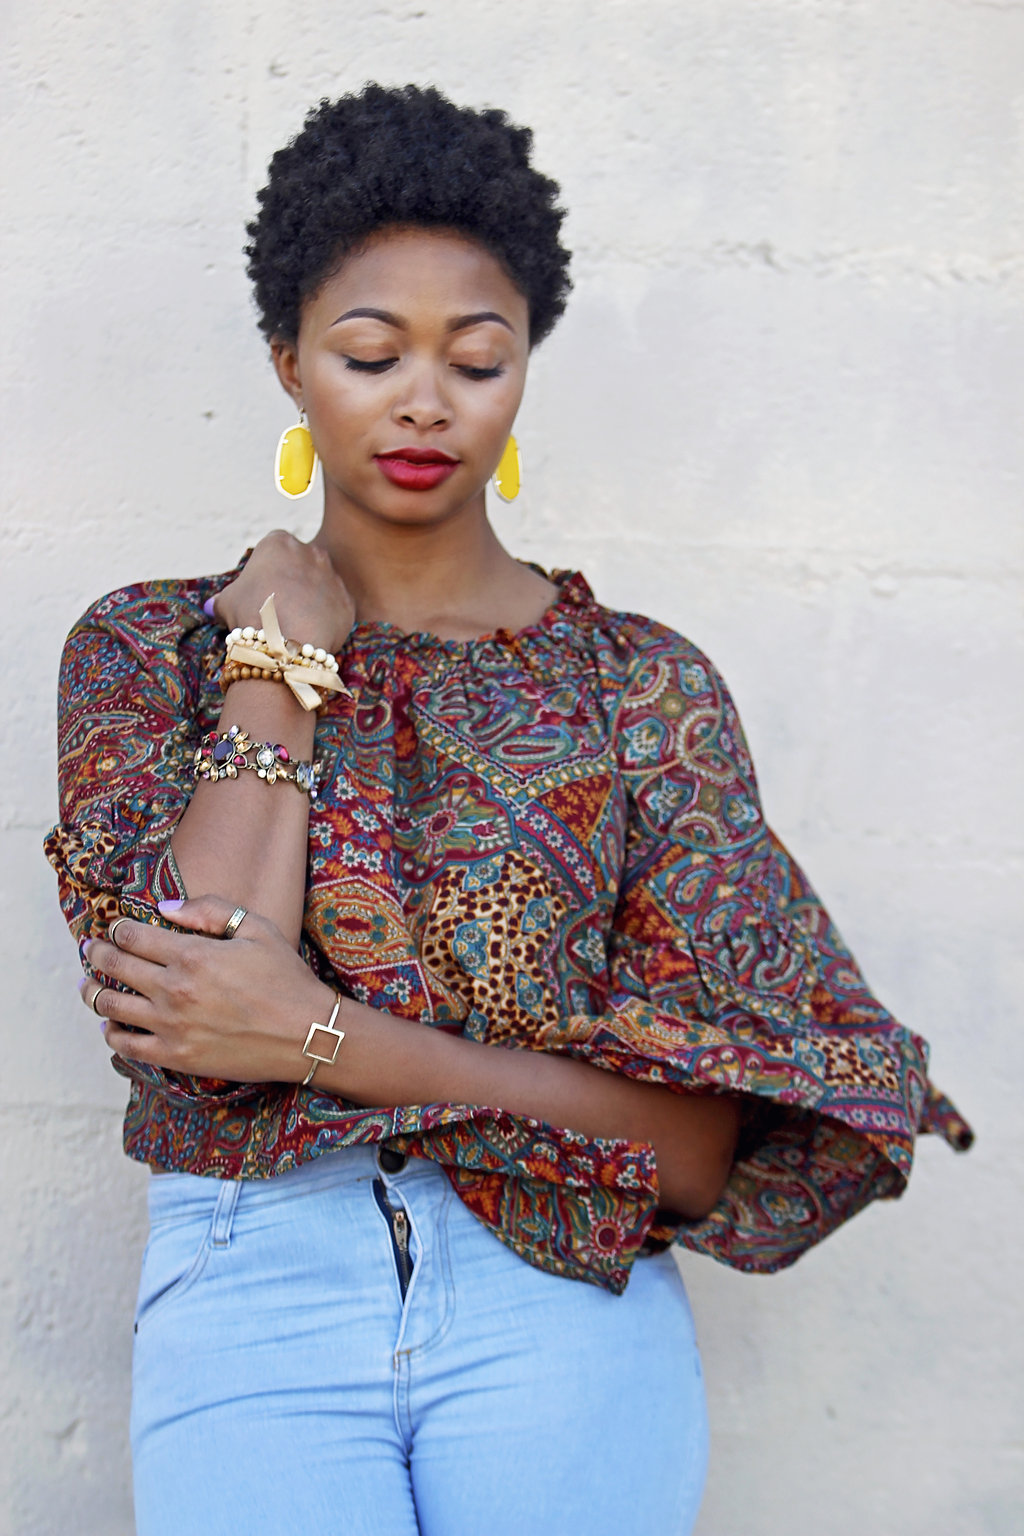 arm party, bell sleeved top